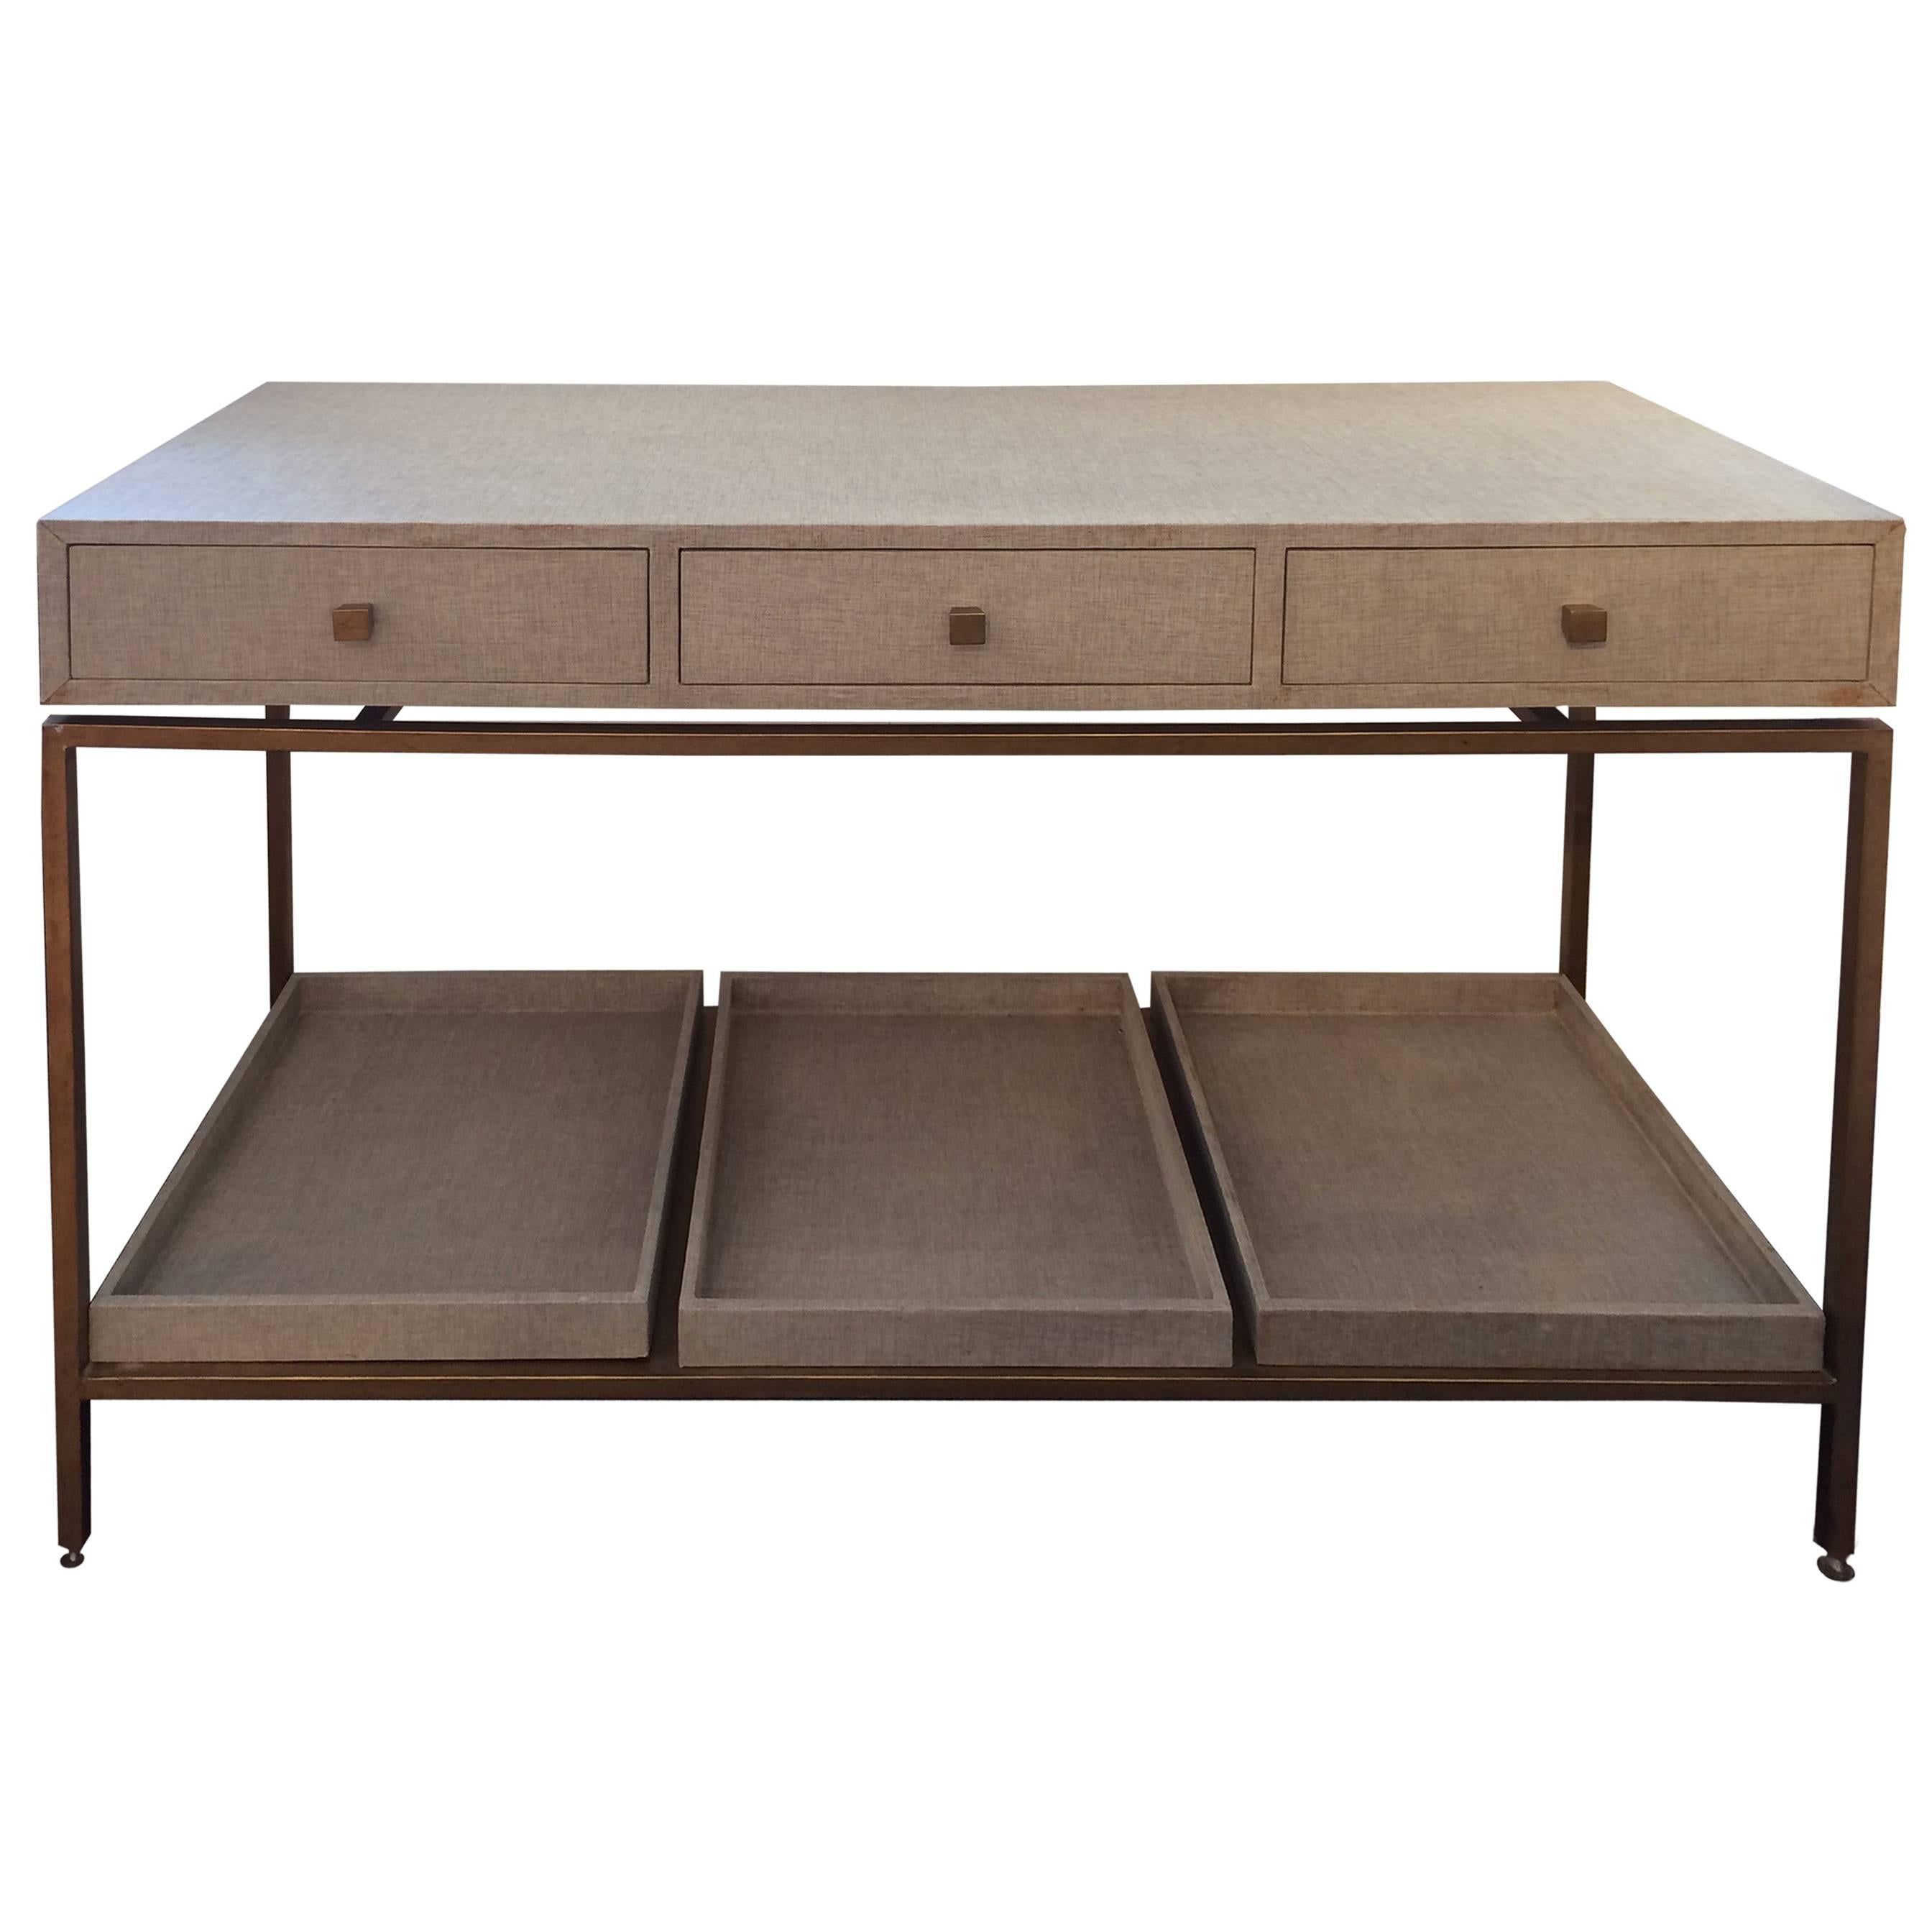 Sophisticated Contemporary Console with Drawers and Trays